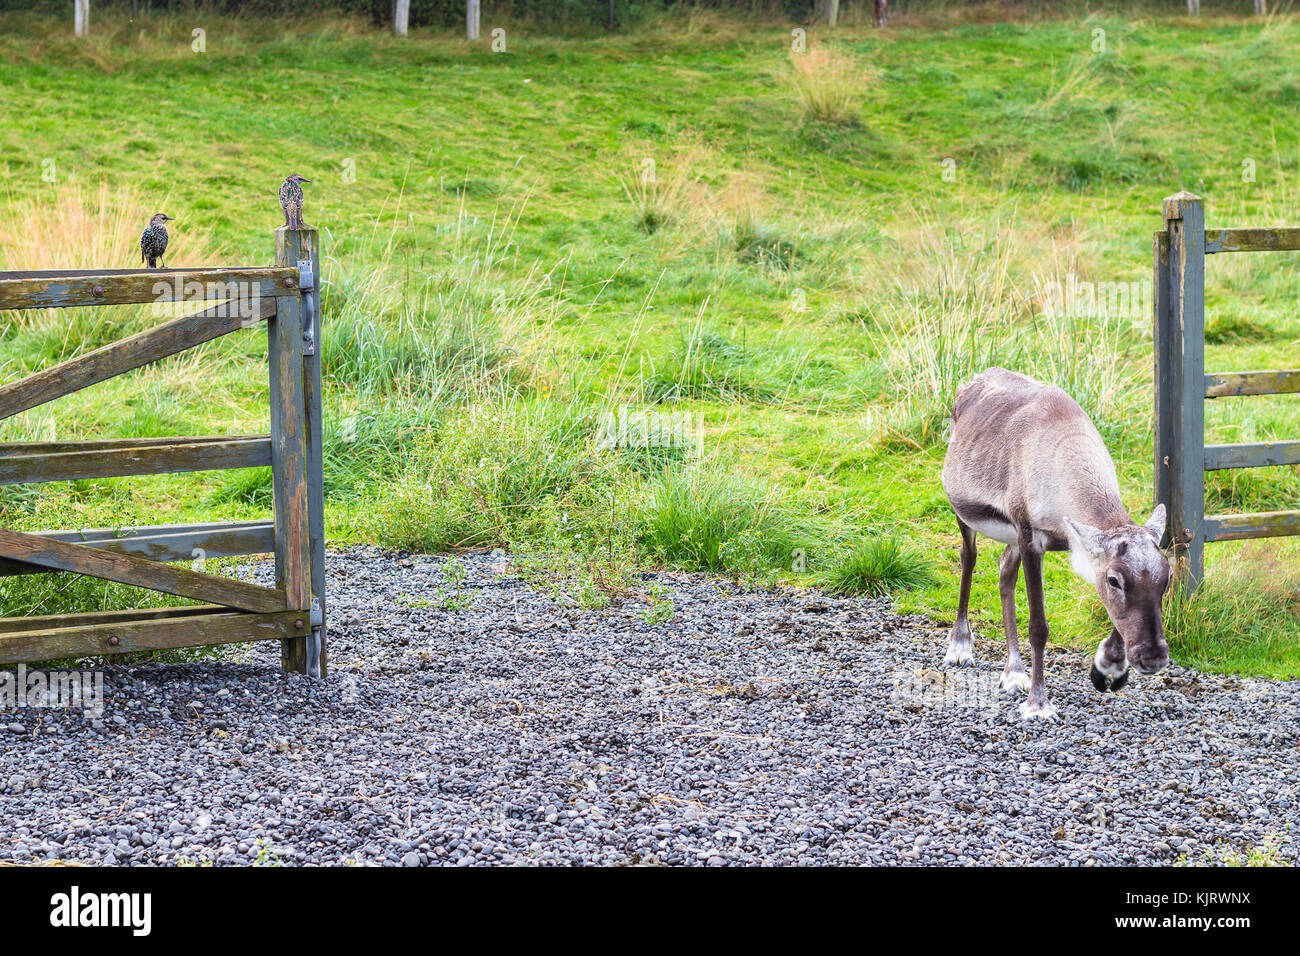 travel to Iceland - reindeer comes out of the corral and starling birds on fence in public family park in laugardalur valley of Reykjavik city in sept Stock Photo